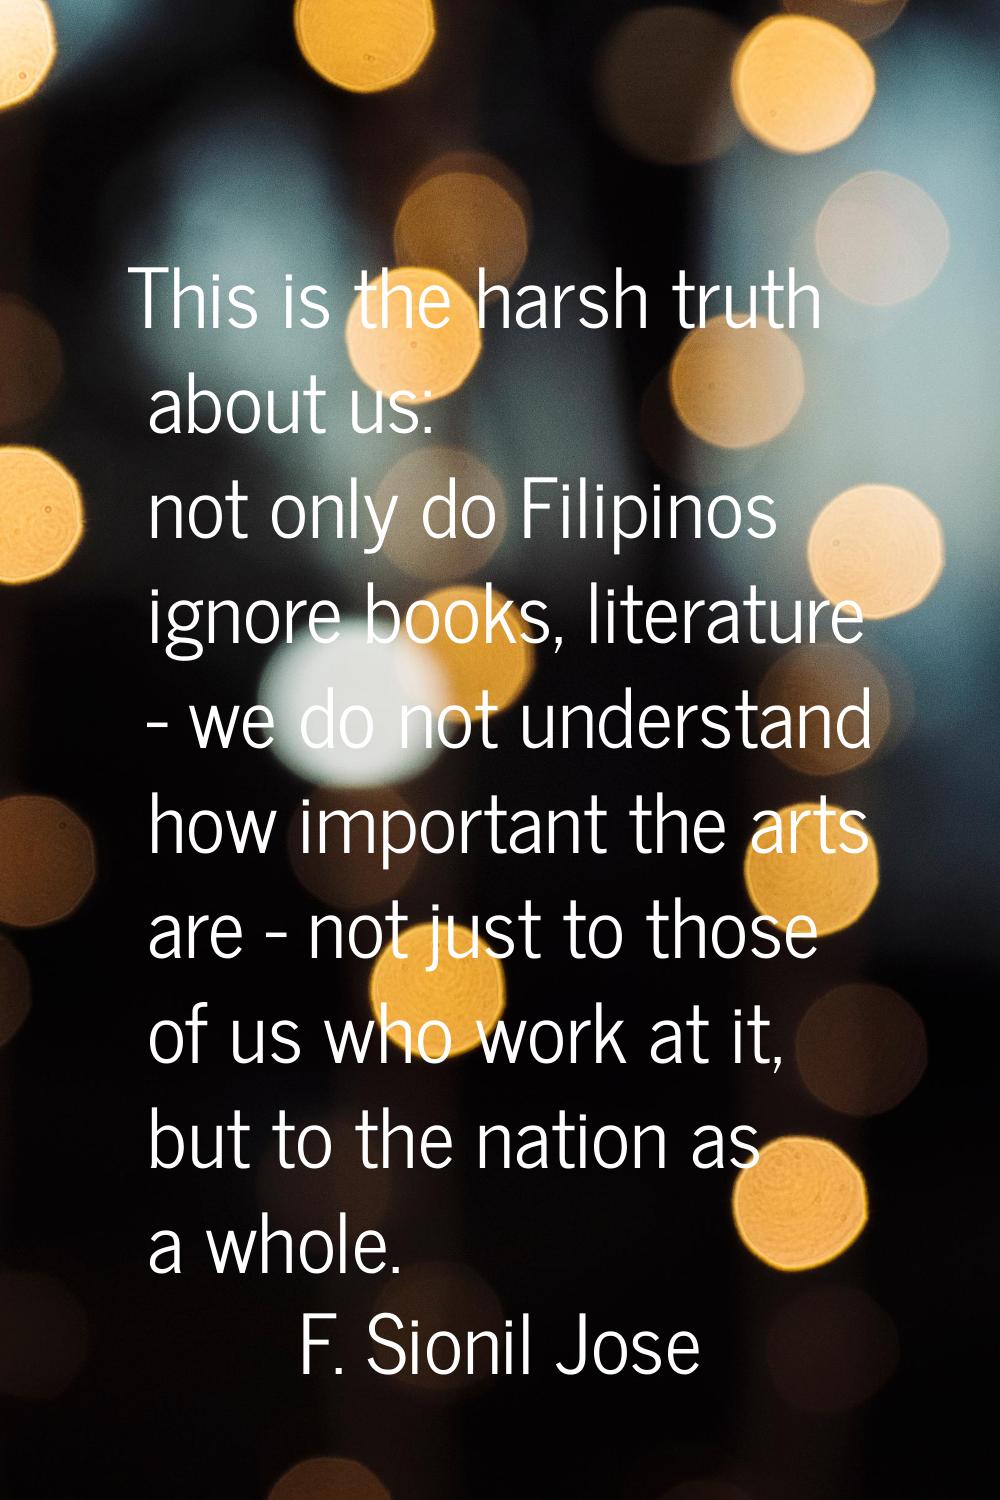 This is the harsh truth about us: not only do Filipinos ignore books, literature - we do not unders